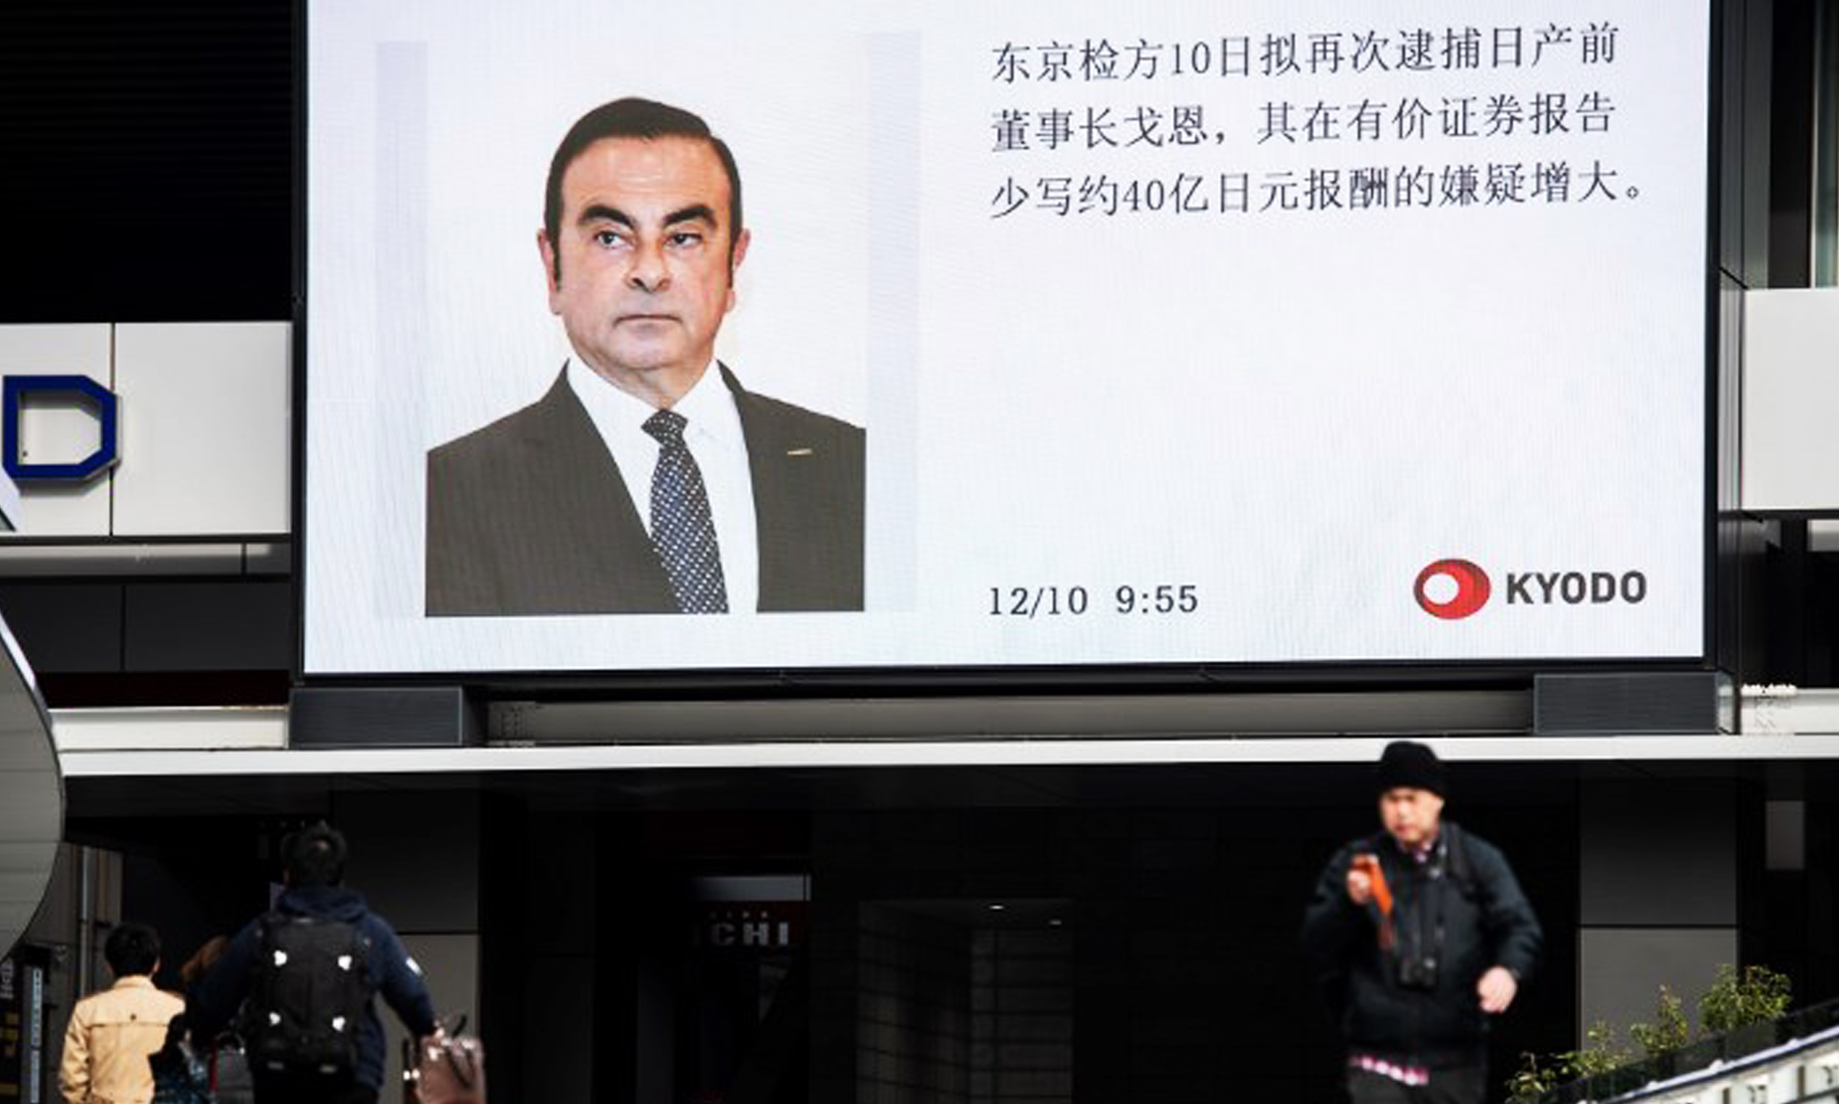 Carlos Ghosn rearrested in wake of further financial misconduct allegations